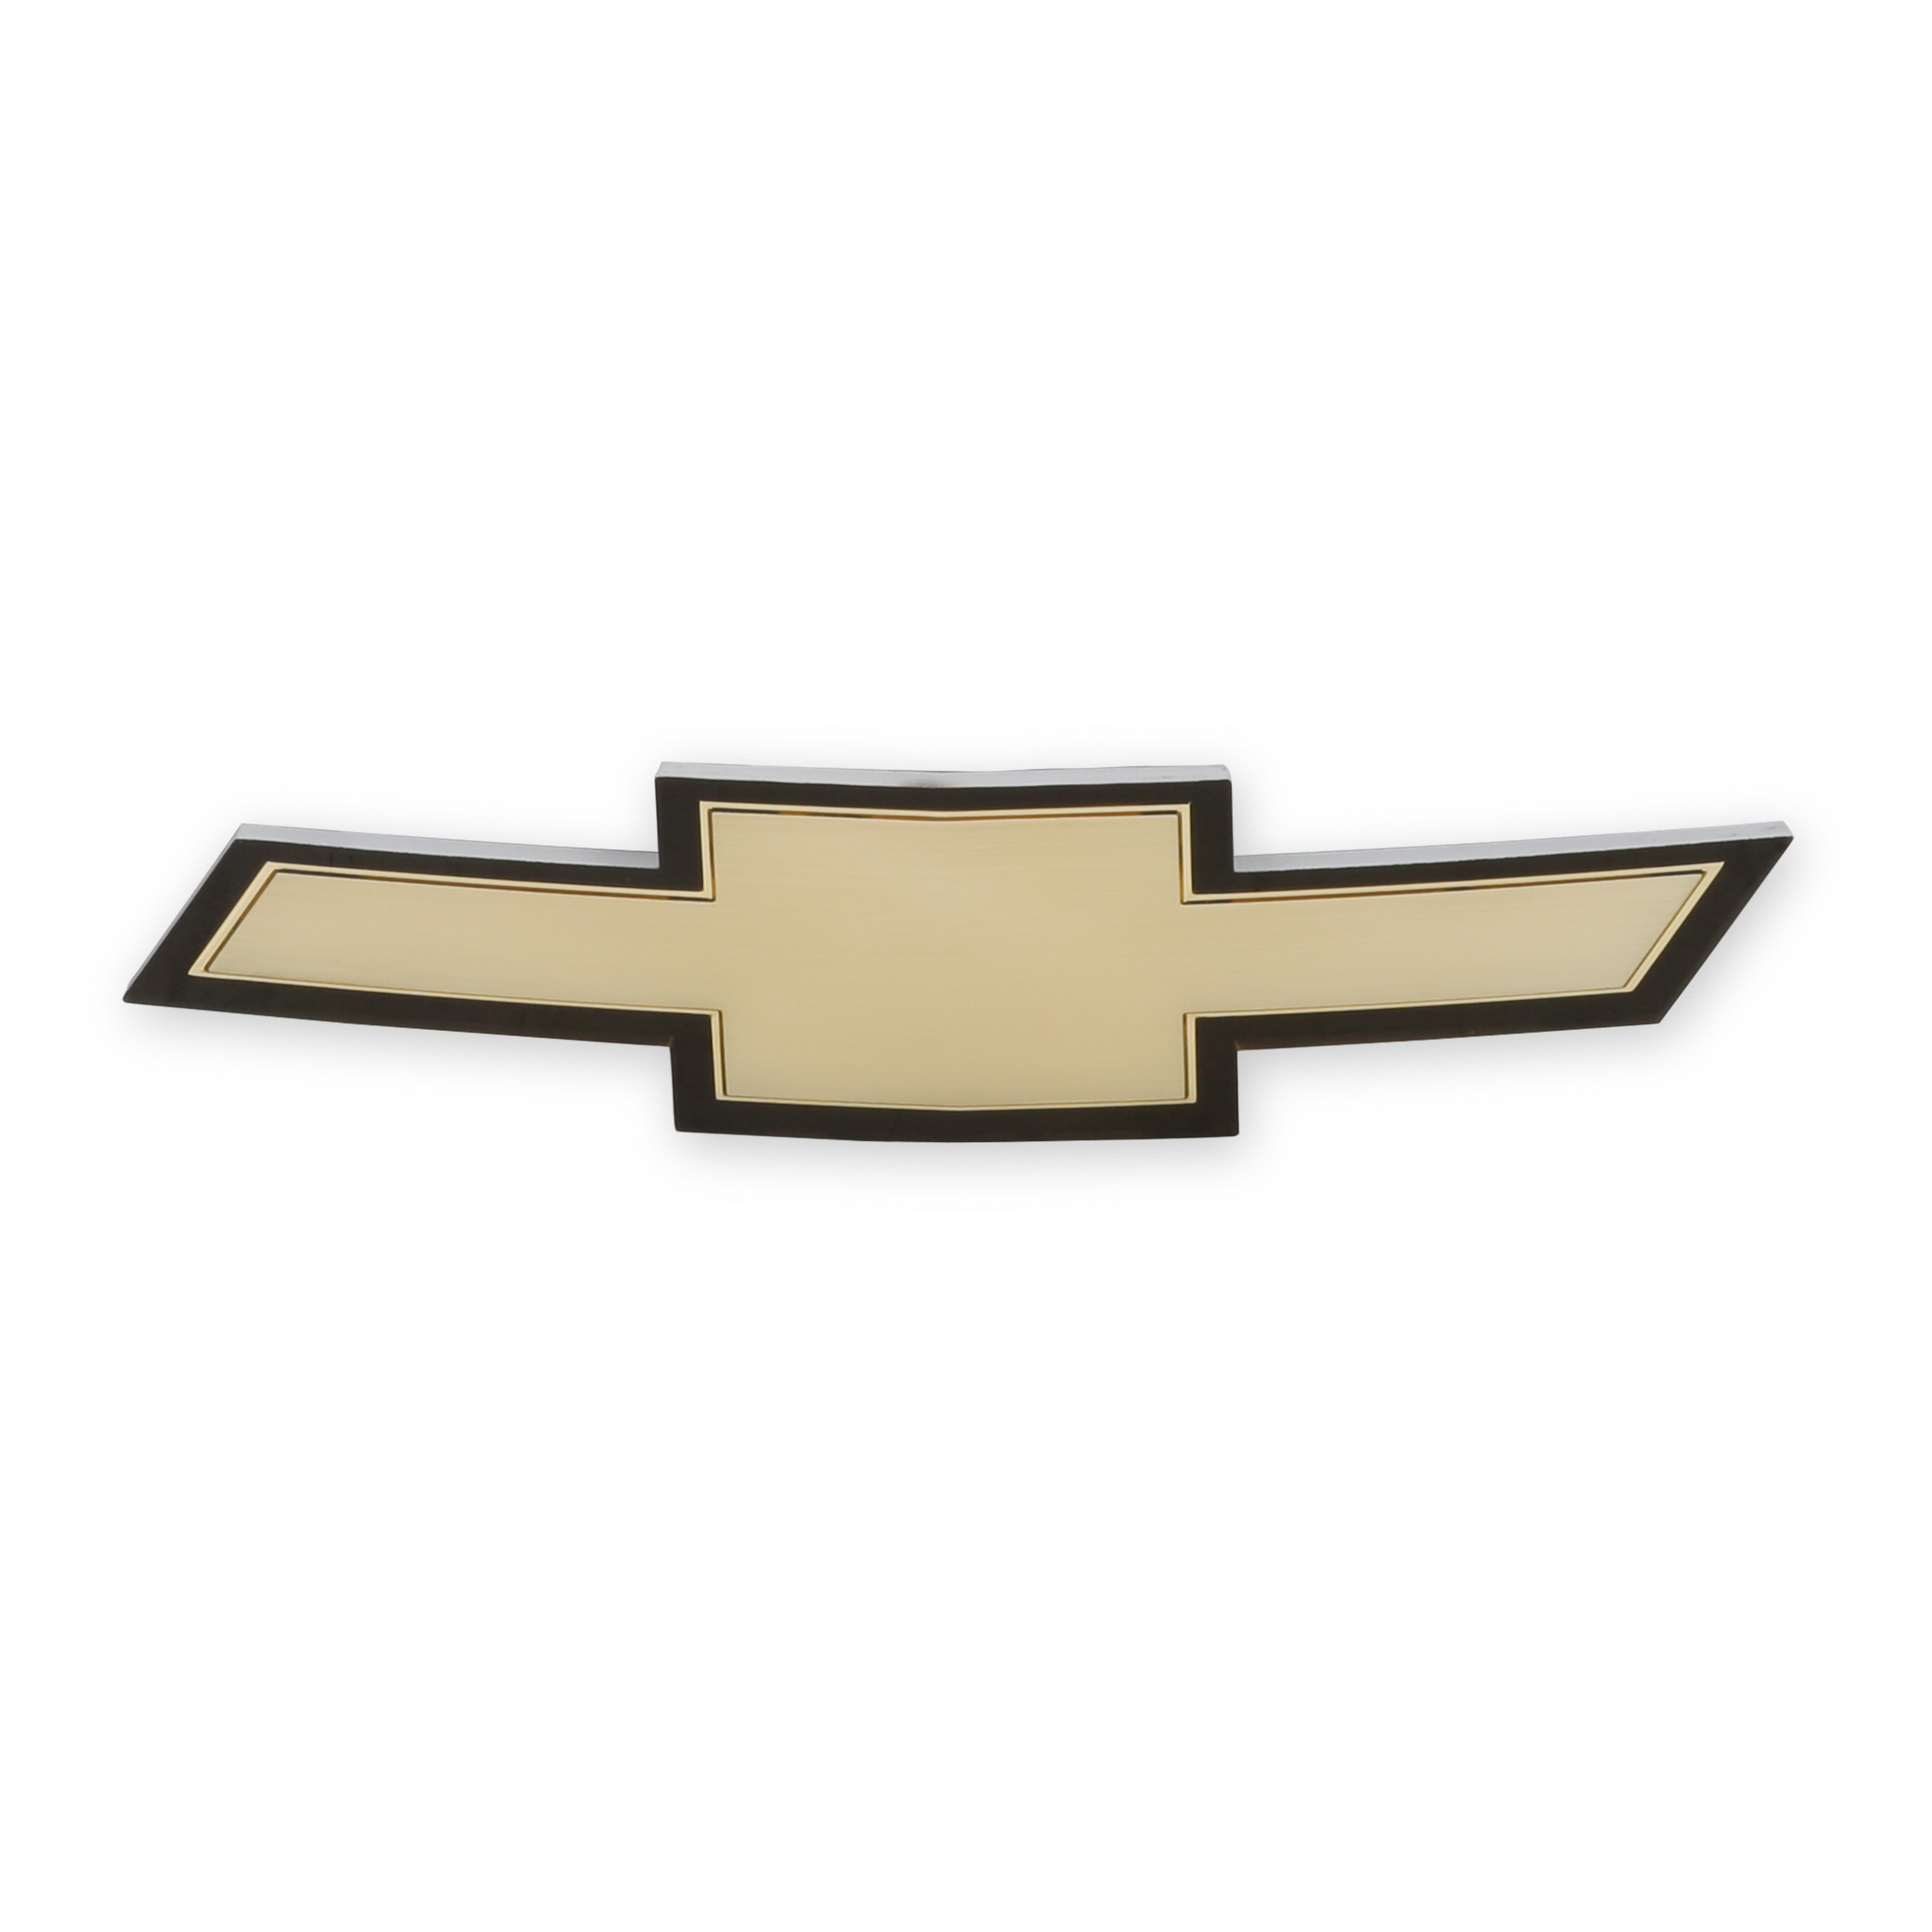 BROTHERS C/K Bowtie Grille Emblem for 2 Headlight Grille pn 04-529